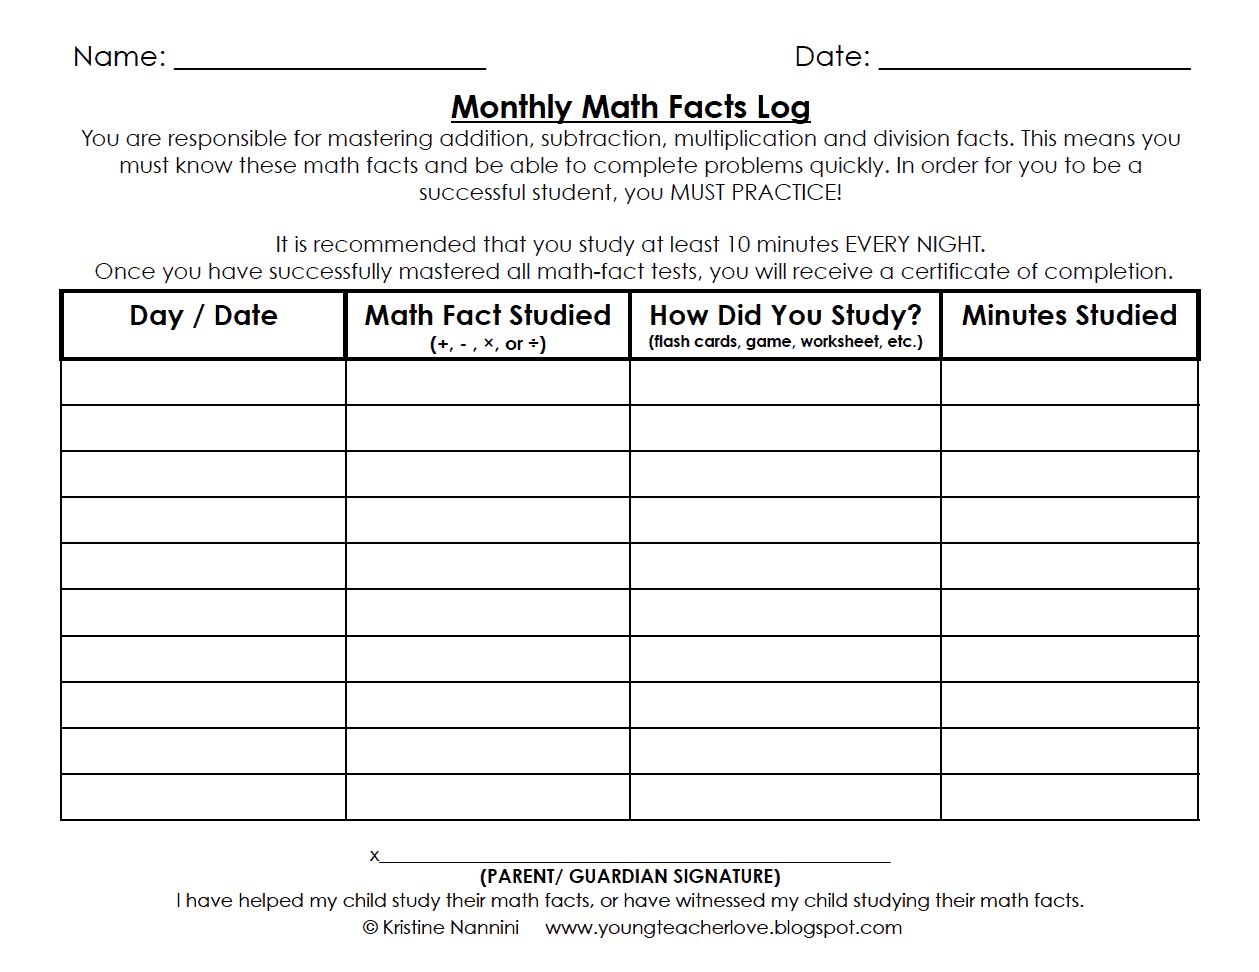 Monthly Math Facts Log -Building Number Sense FREEBIE - Young Teacher Love by Kristine Nannini